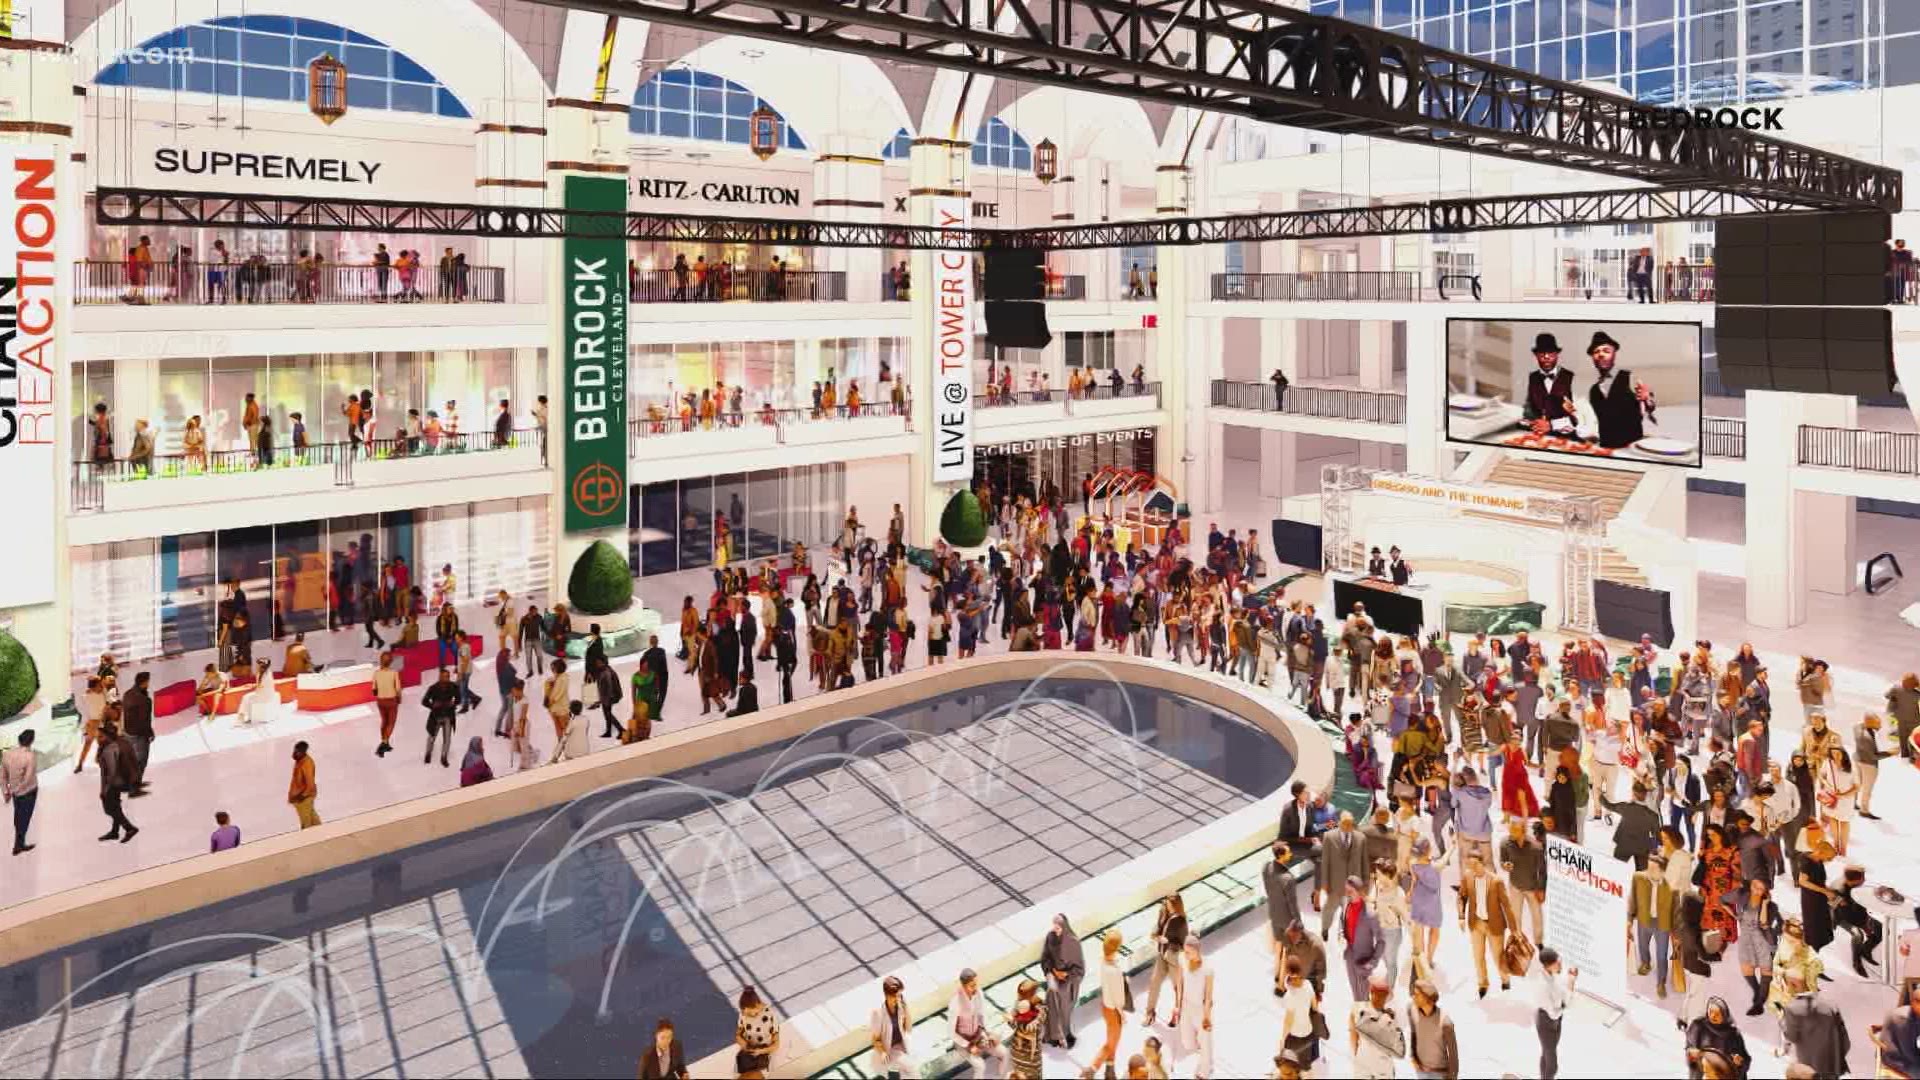 Tower City Center is getting a facelift. Bedrock, a real estate firm, revealed a first look at the upgrades coming soon to the iconic downtown Cleveland location.